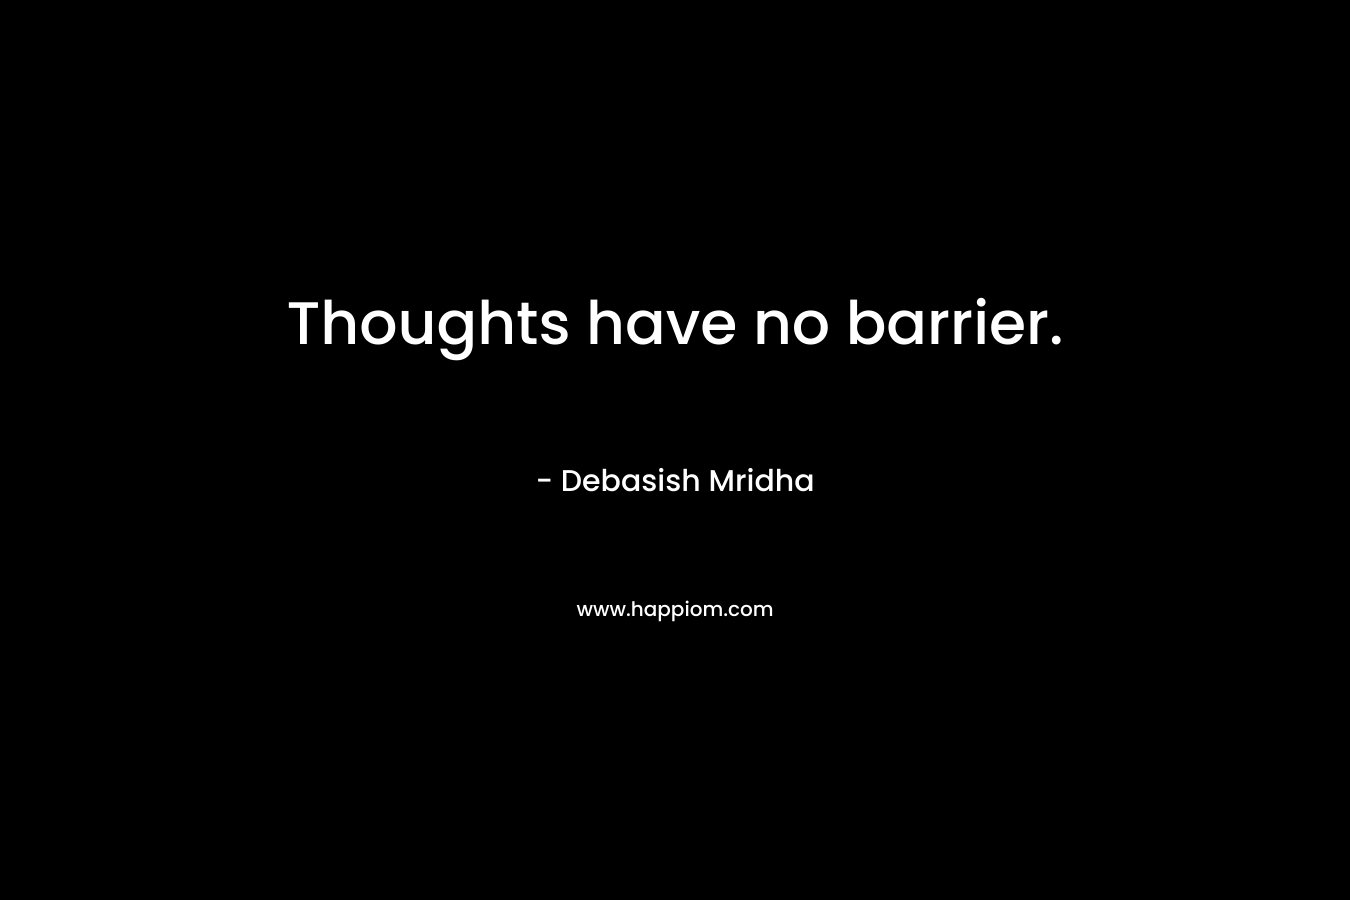 Thoughts have no barrier.